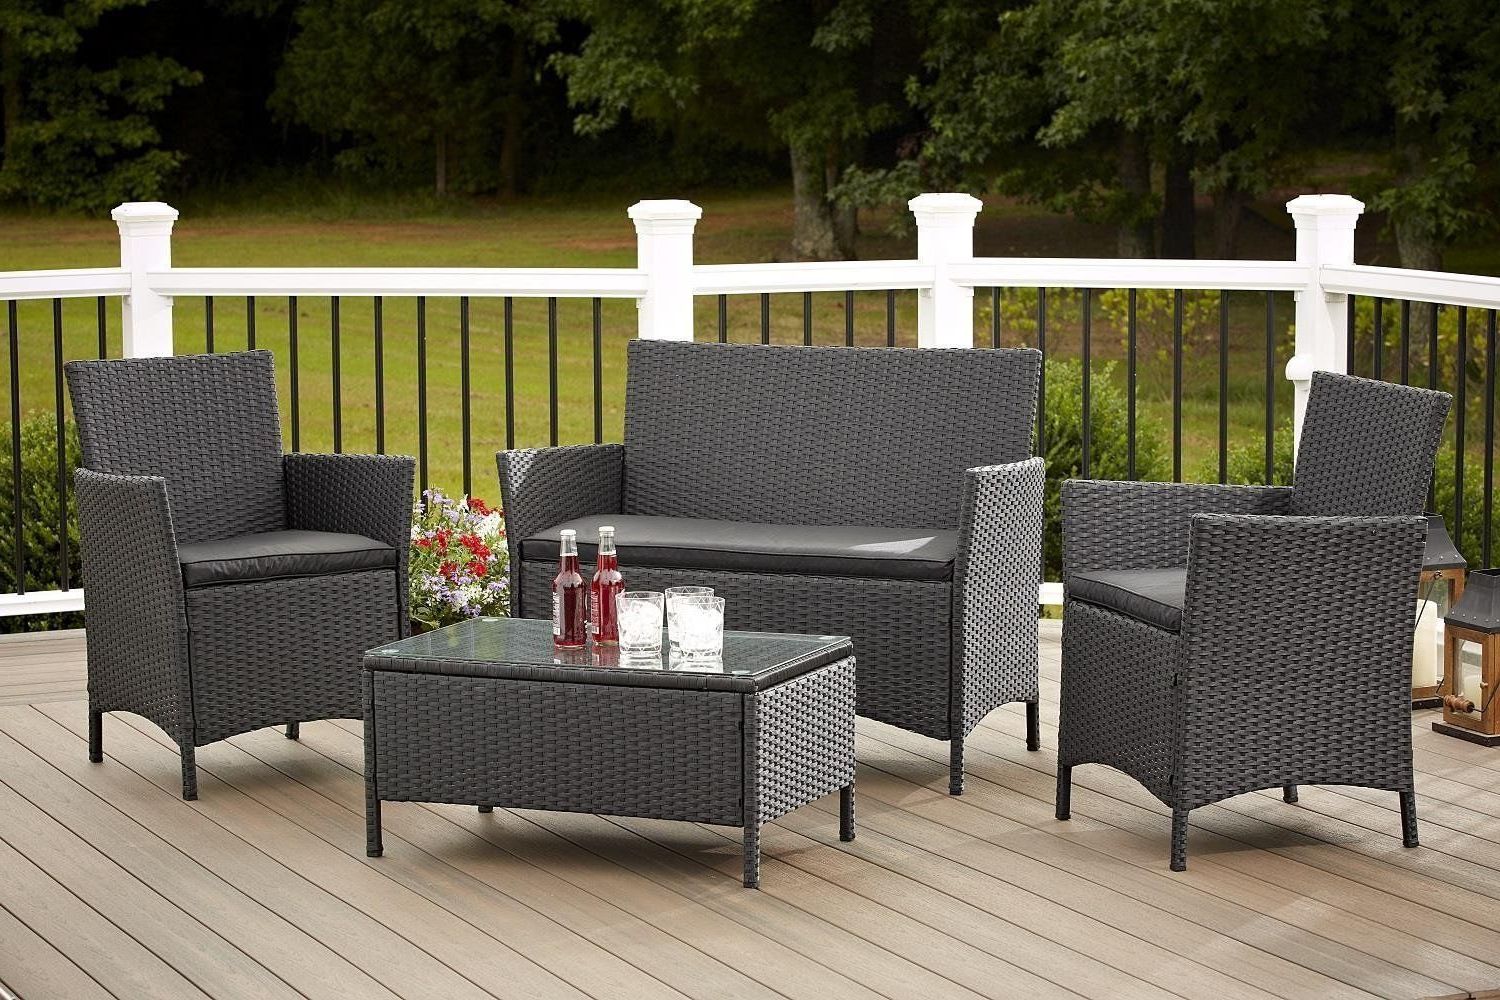 Well Known Jamaica 4 Piece Patio Furniture Set In Outdoor Resin Wicker With Black Throughout 4 Piece Outdoor Patio Sets (View 4 of 15)